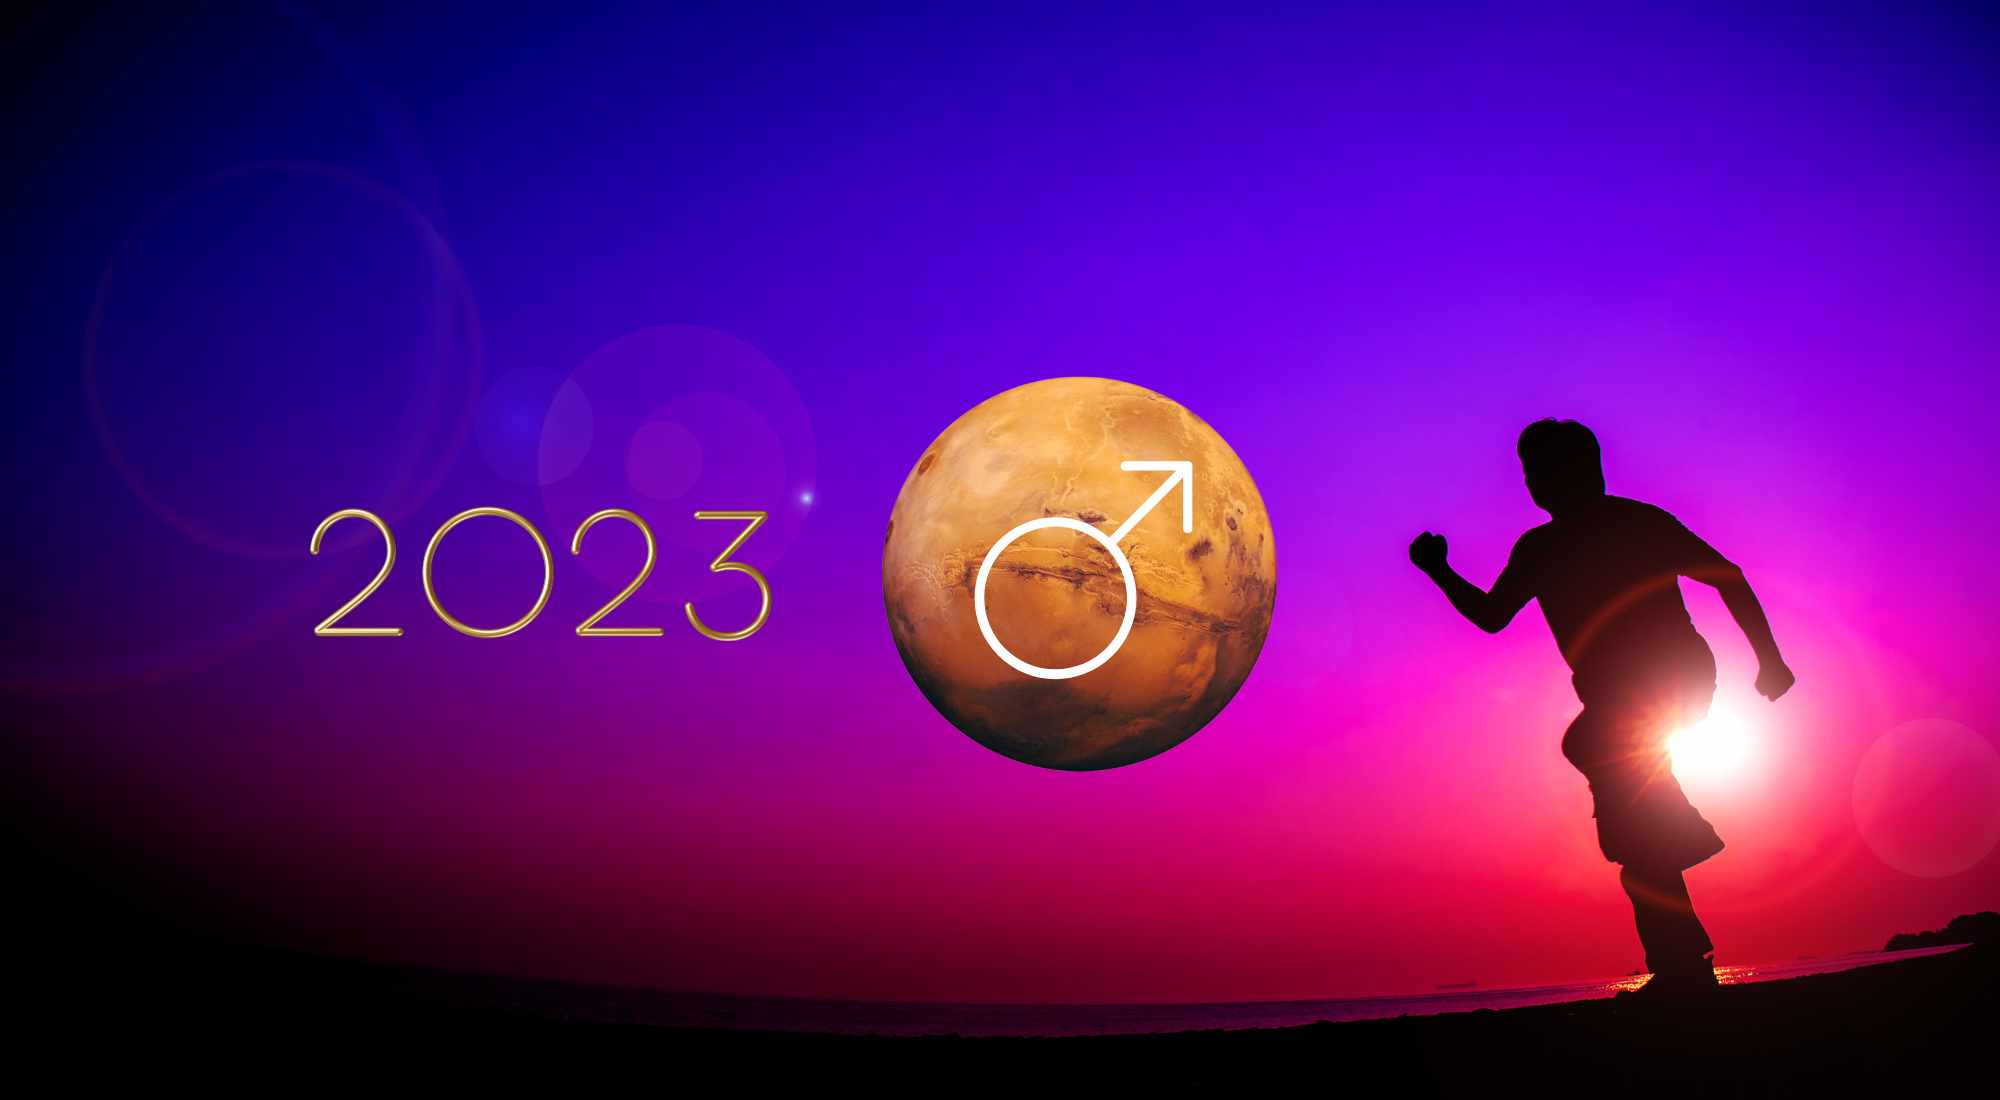 2023, the year of Mars and courage